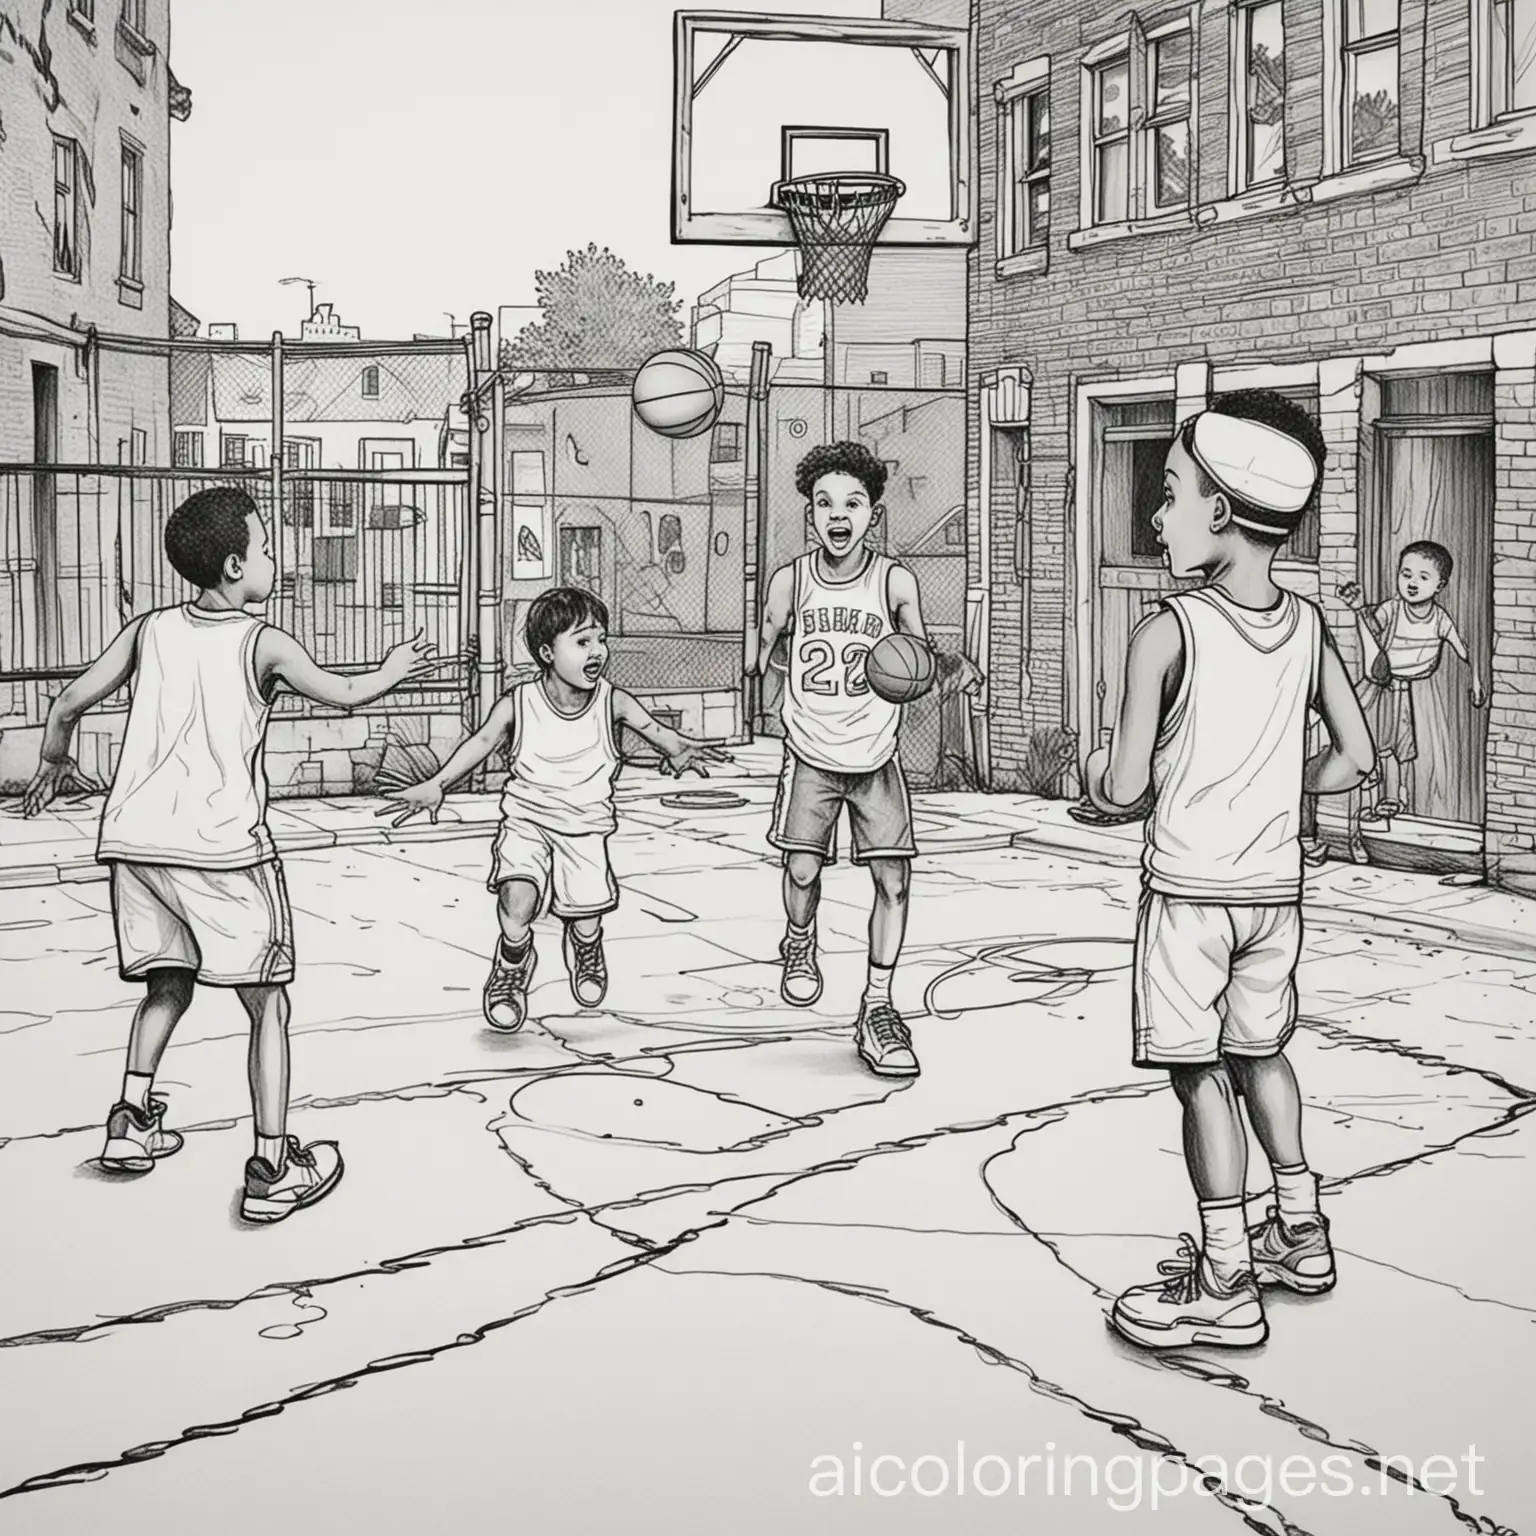 a cartoon group of six kids playing a lively basketball game on a basketball court in a Boston ghetto, capturing a humorous match between teams with eccentric players"
 Adult Coloring Page, black and white, line art, white background, Simplicity, Ample White Space, Coloring Page, black and white, line art, white background, Simplicity, Ample White Space. The background of the coloring page is plain white to make it easy for young children to color within the lines. The outlines of all the subjects are easy to distinguish, making it simple for kids to color without too much difficulty